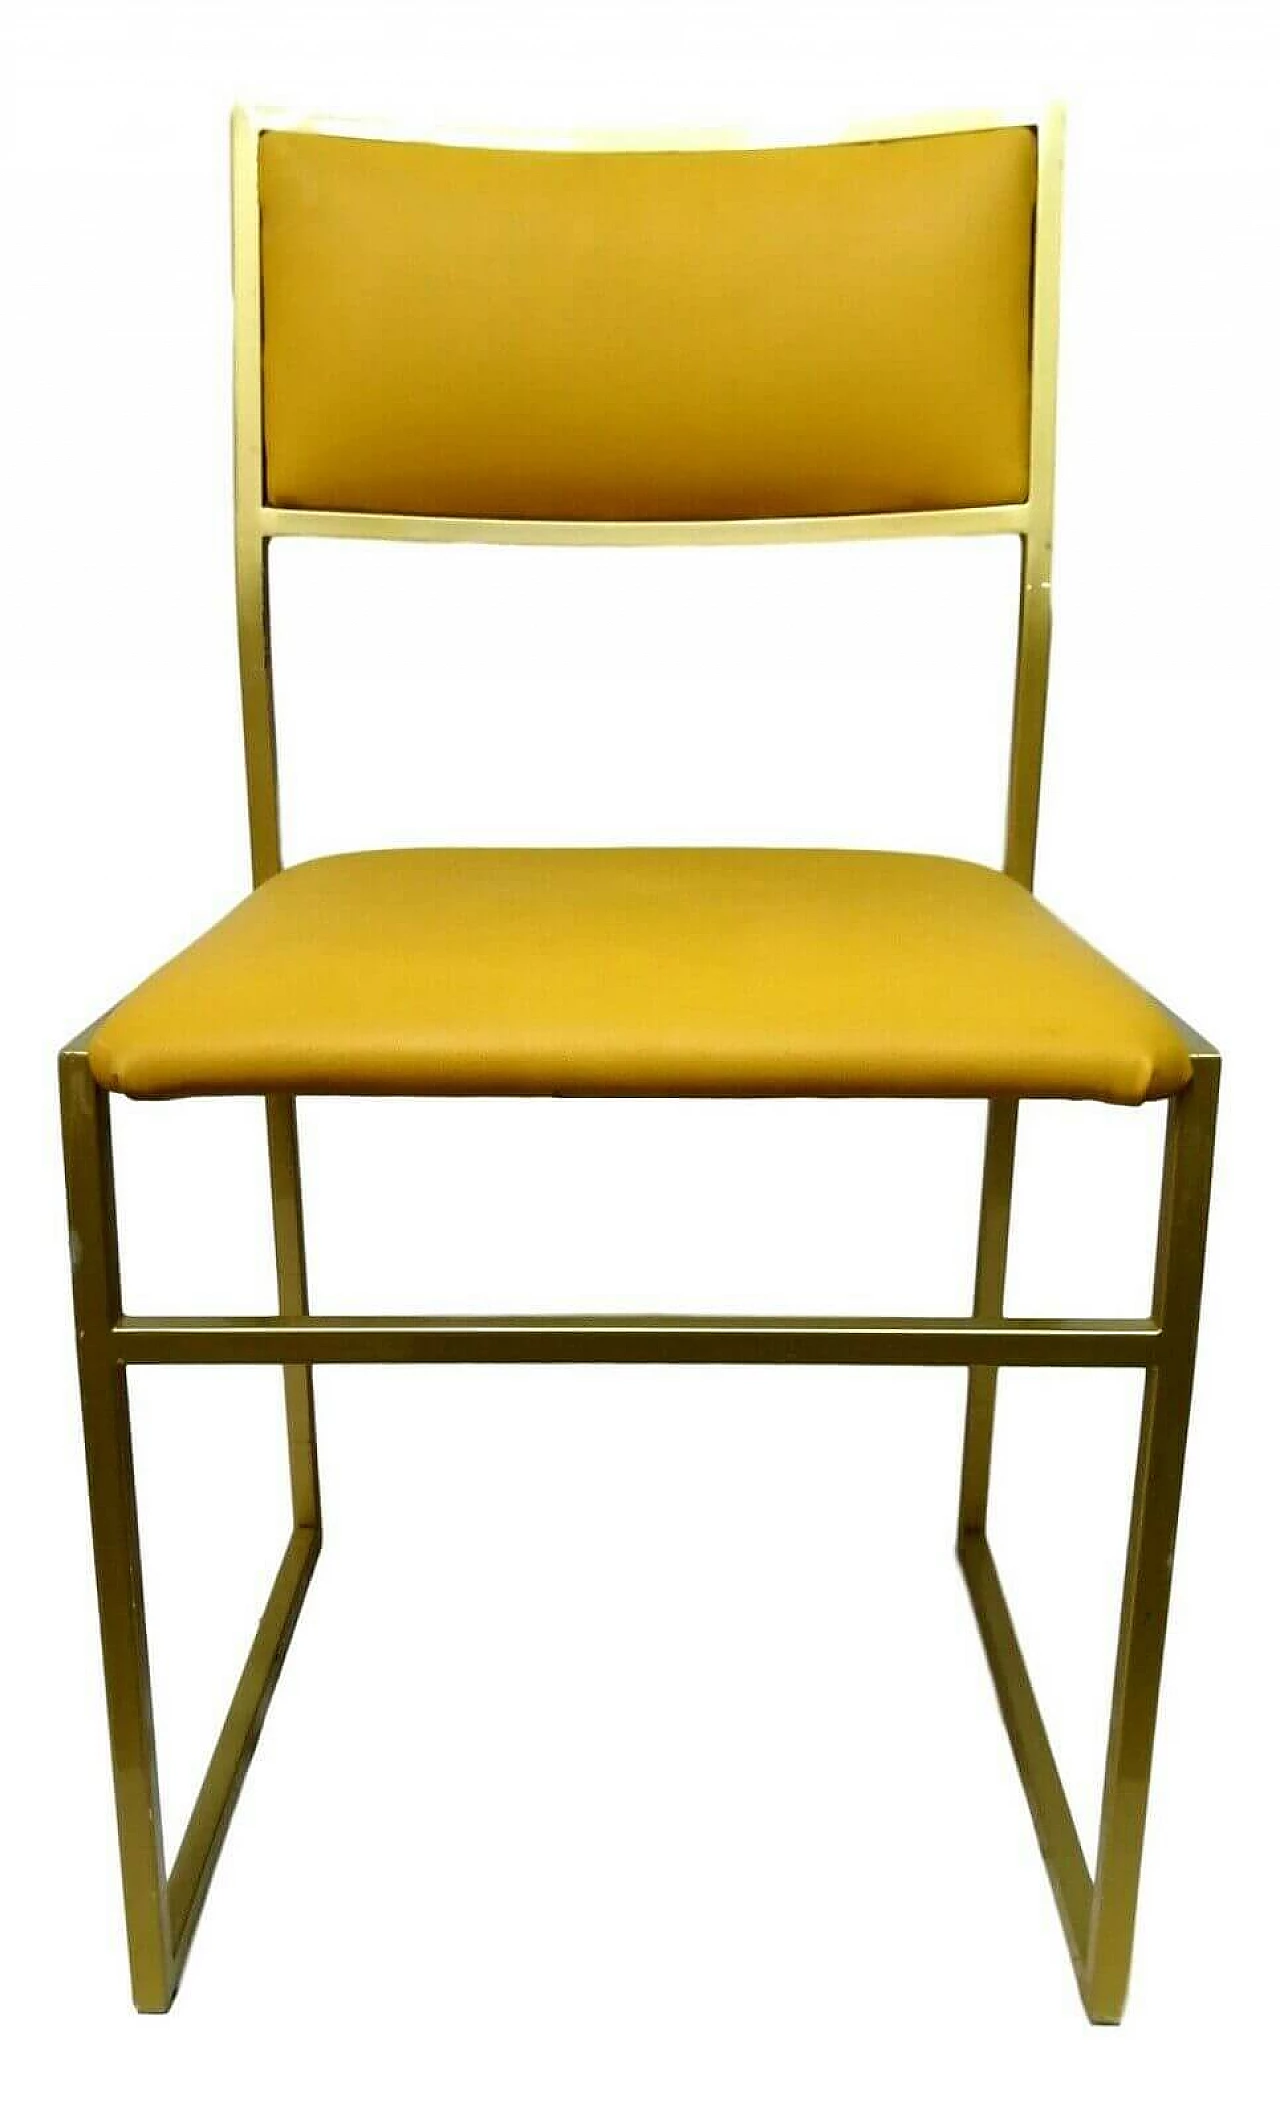 Metal chair and seat yellow, 70s 1166237